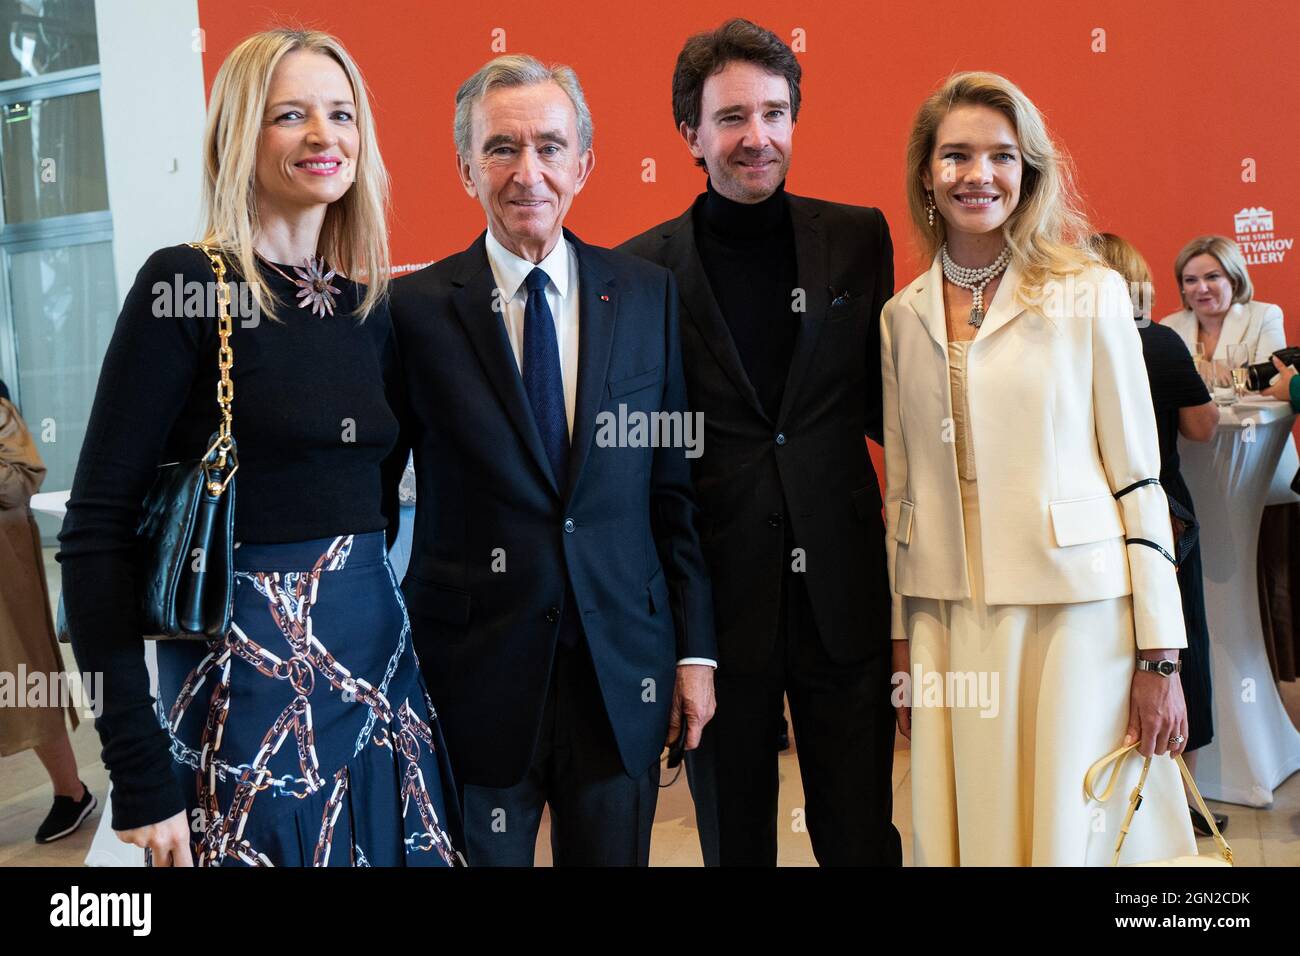 Paris, France on September 21, 2021. Bernard Arnault, CEO of LVMH, his  daughter Delphine Arnault, his son Antoine Arnault and his daughter-in-law  Natalia Vodianova during the opening of the exhibition of 'The